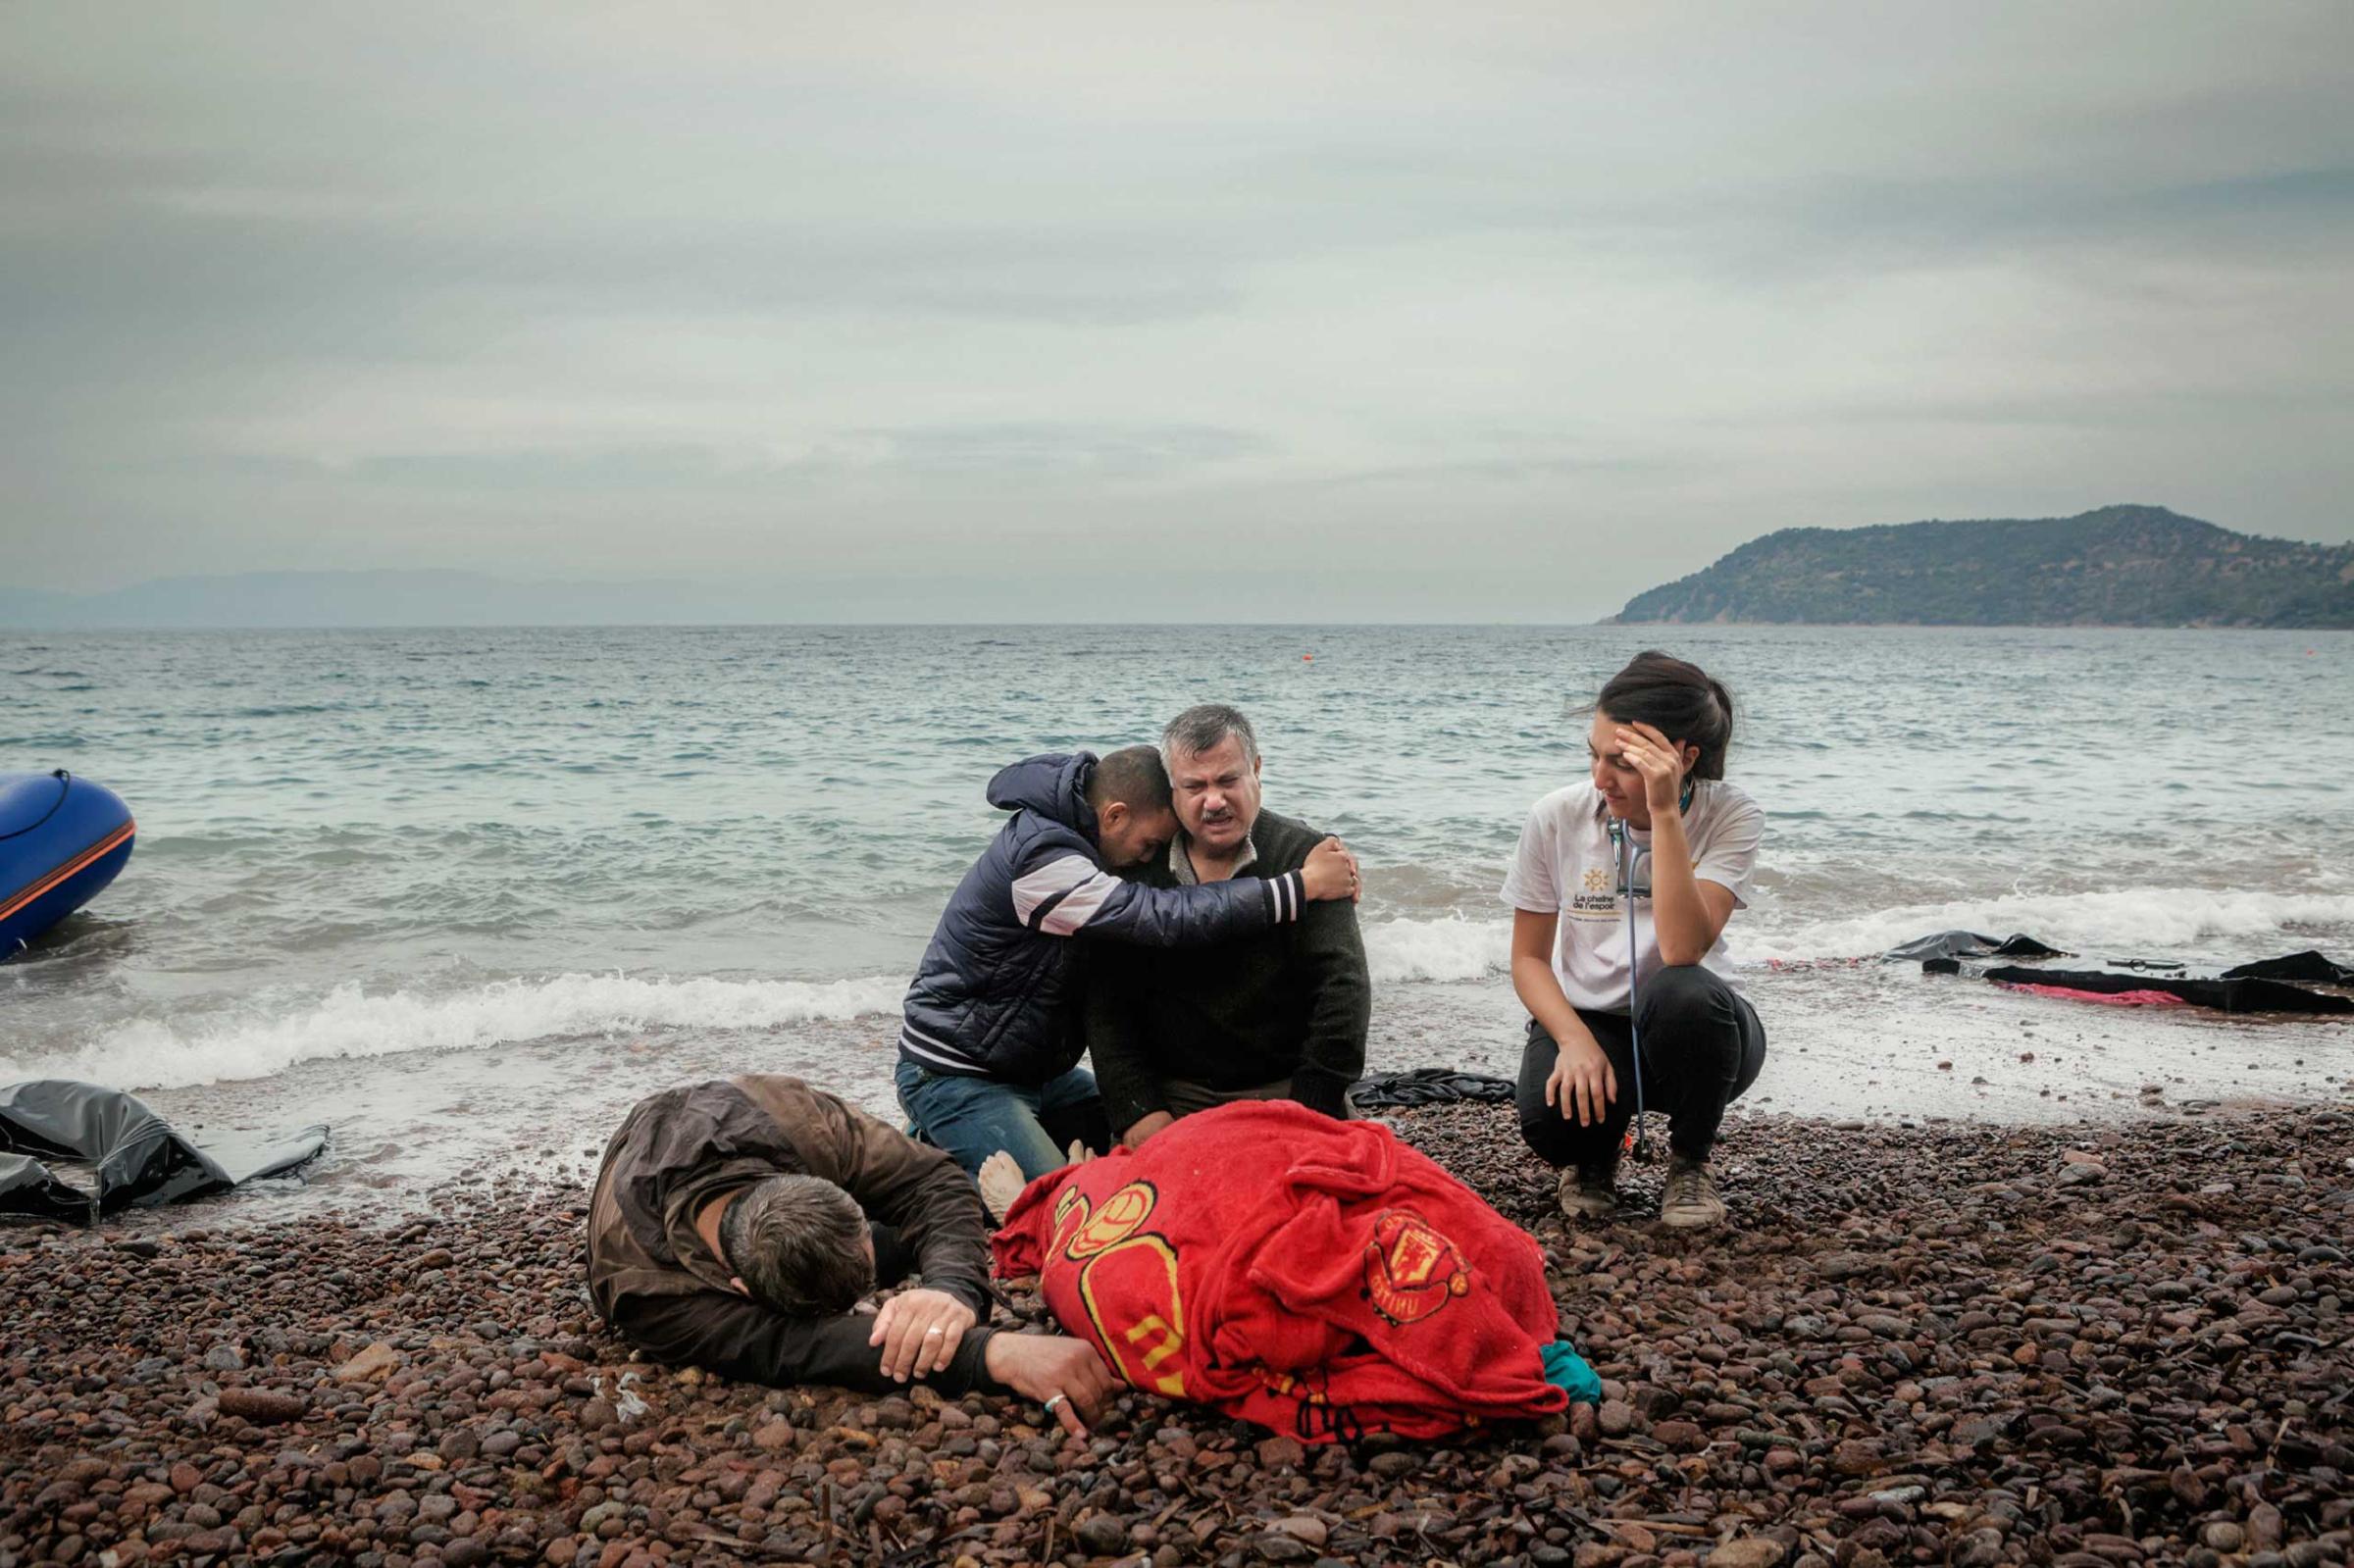 The husband (right) and relative of a 65-year old Iraqi refugee woman grieved as her body is covered with a towel on the Greek island of Lesbos, Greece, Oct. 16, 2015. A man who made the journey with them and a volunteer stood nearby. The woman reportedly drowned after smugglers violently forced the family to leave the Turkish coast in an inflatable boat, which immediately began to sink after they departed.